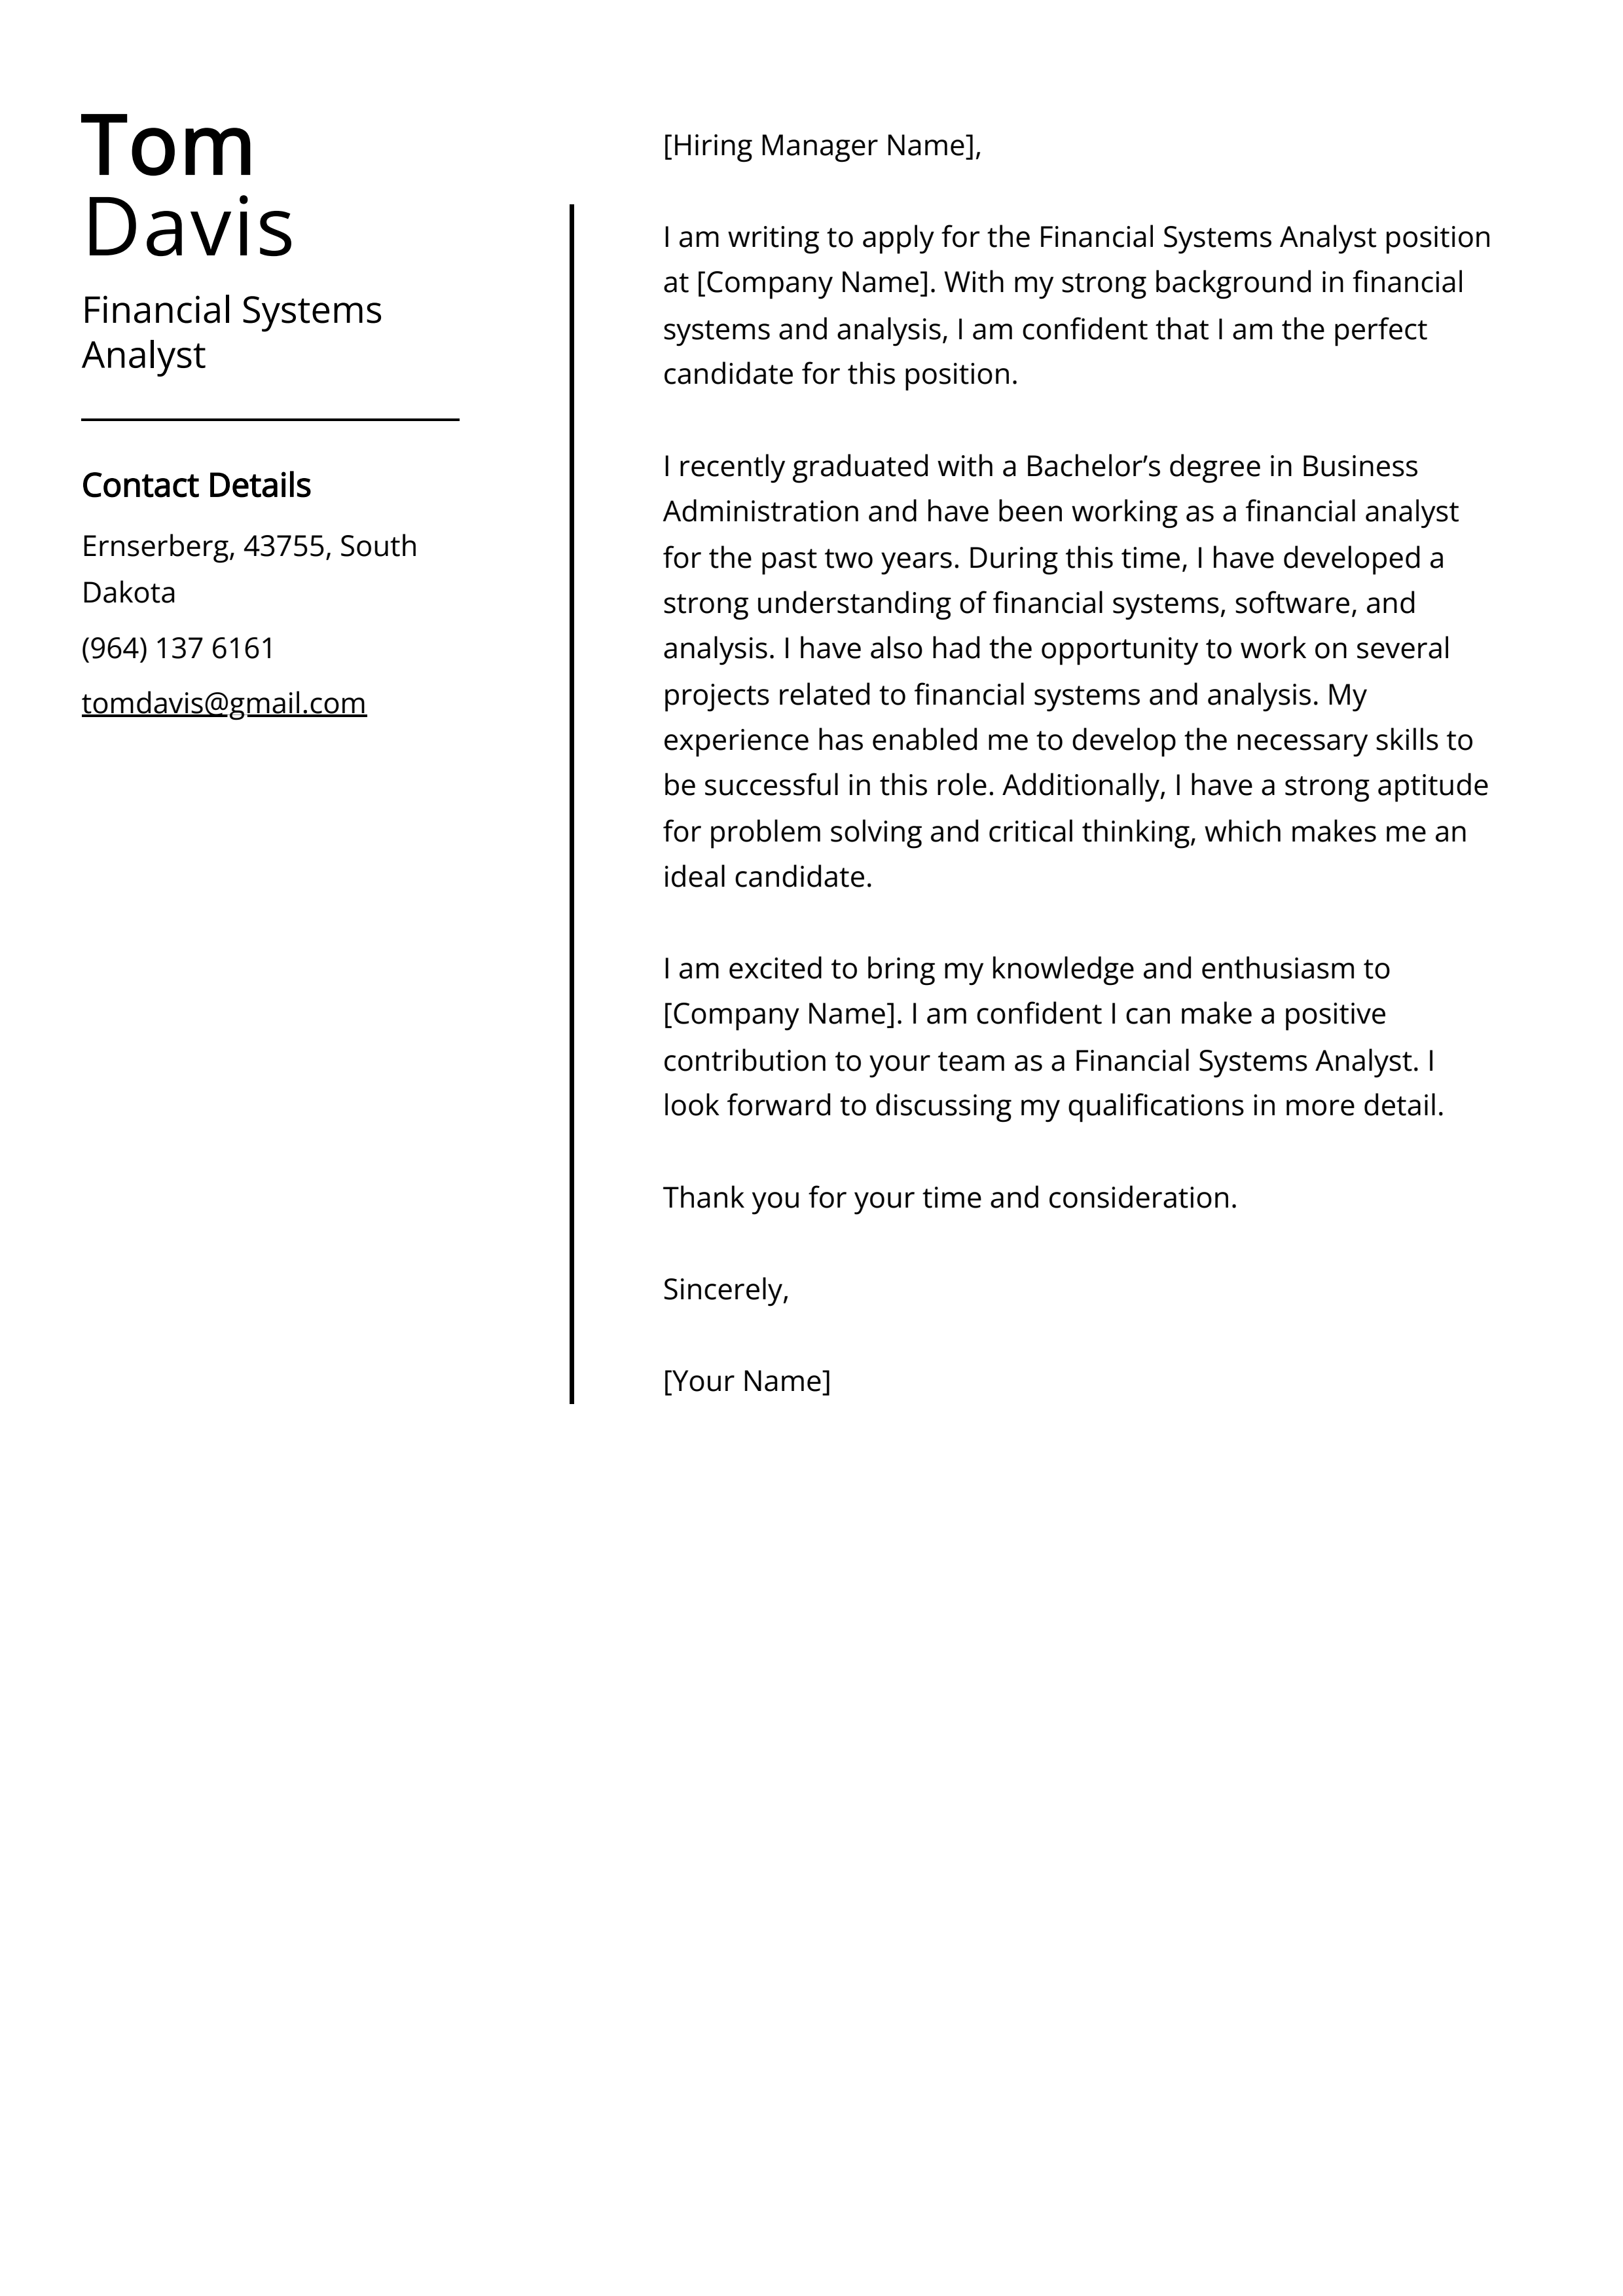 Financial Systems Analyst Cover Letter Example